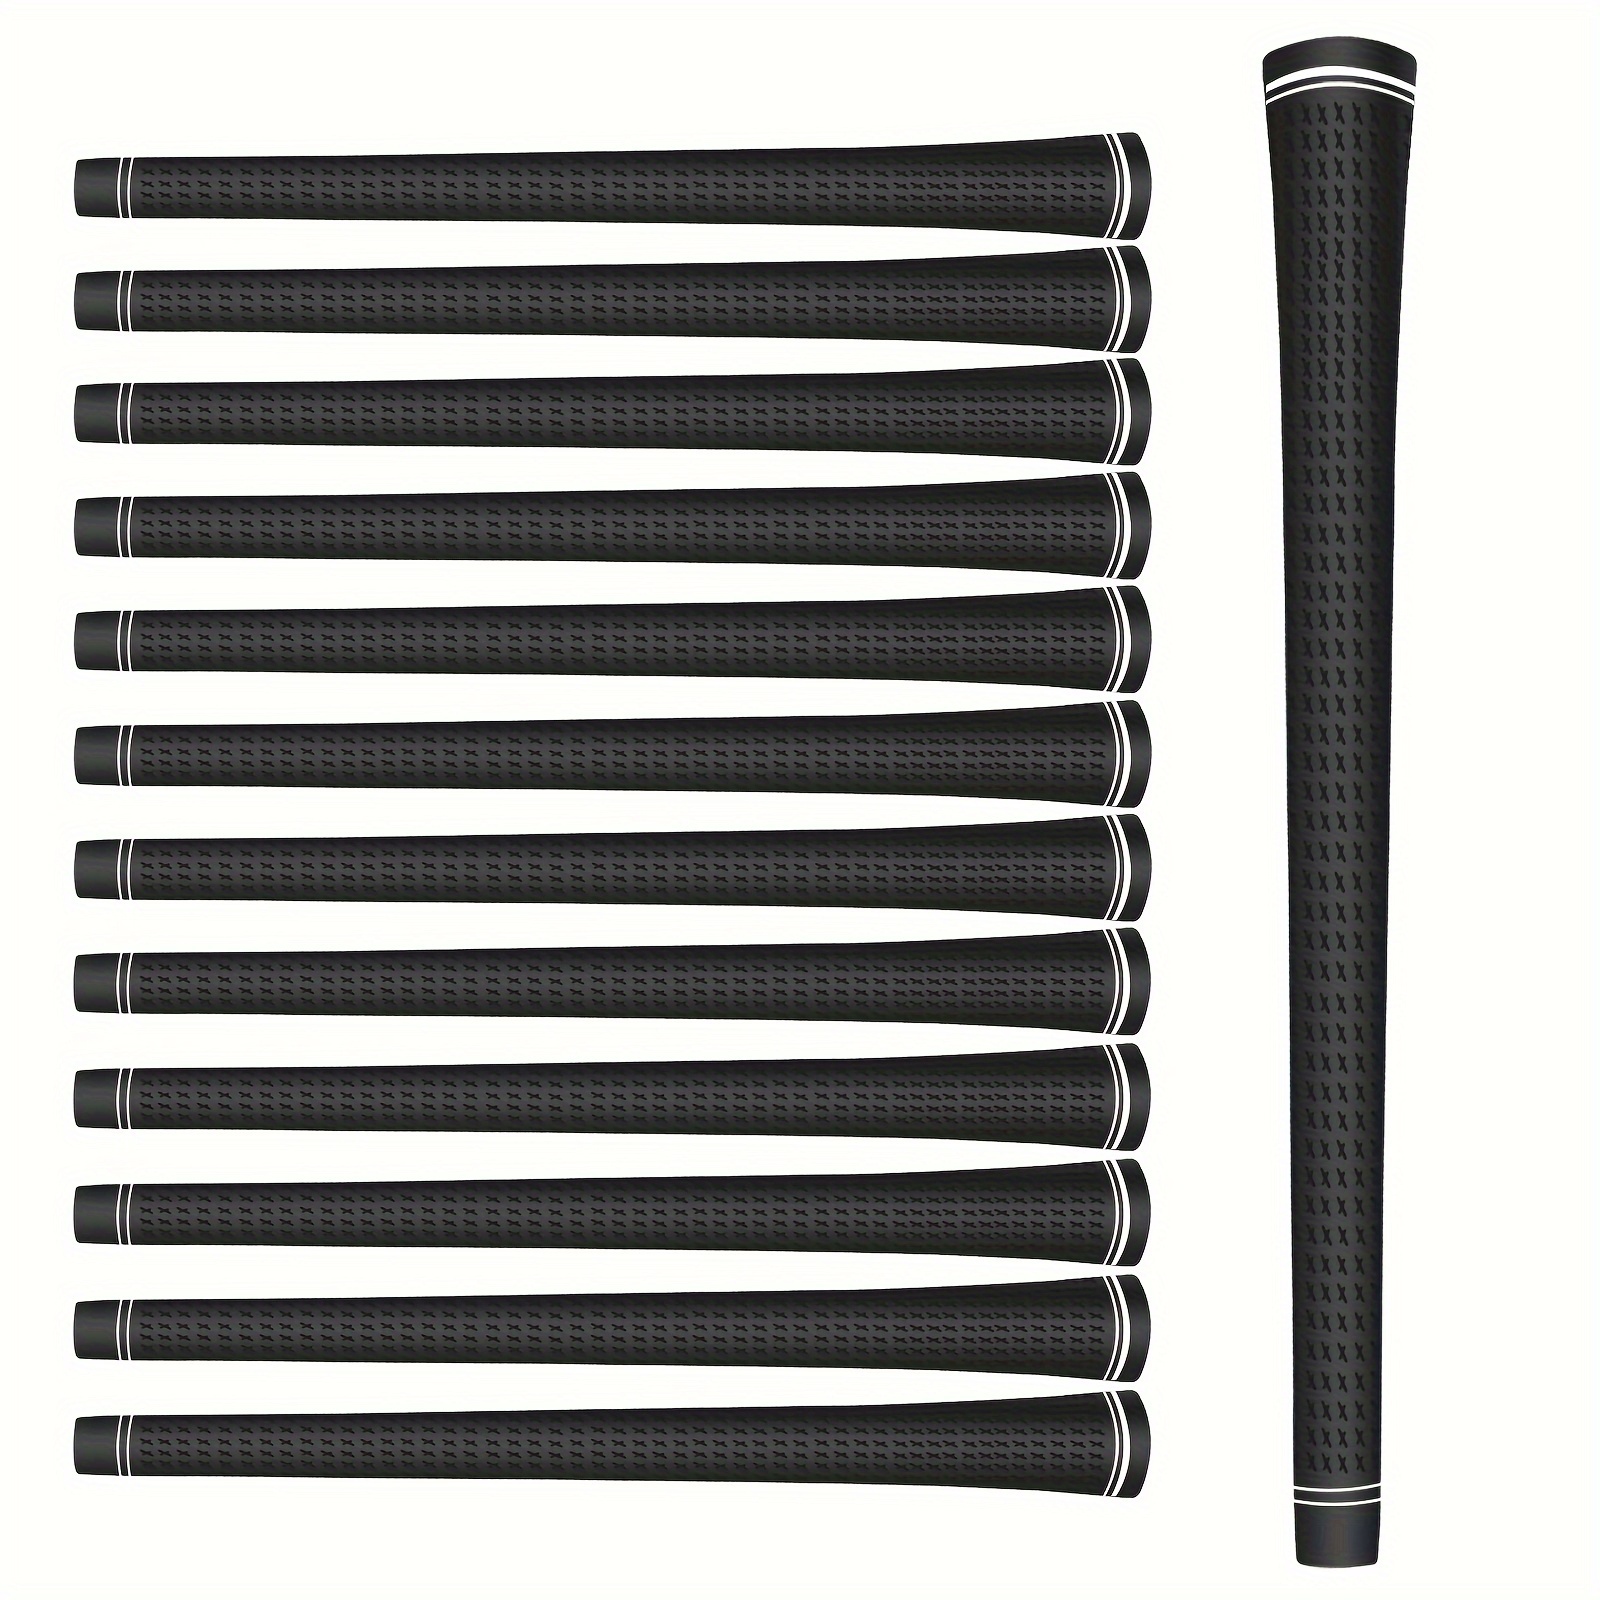 

13pcs Rubber Golf Grips, High Traction And Feedback Rubber Golf Club Grips